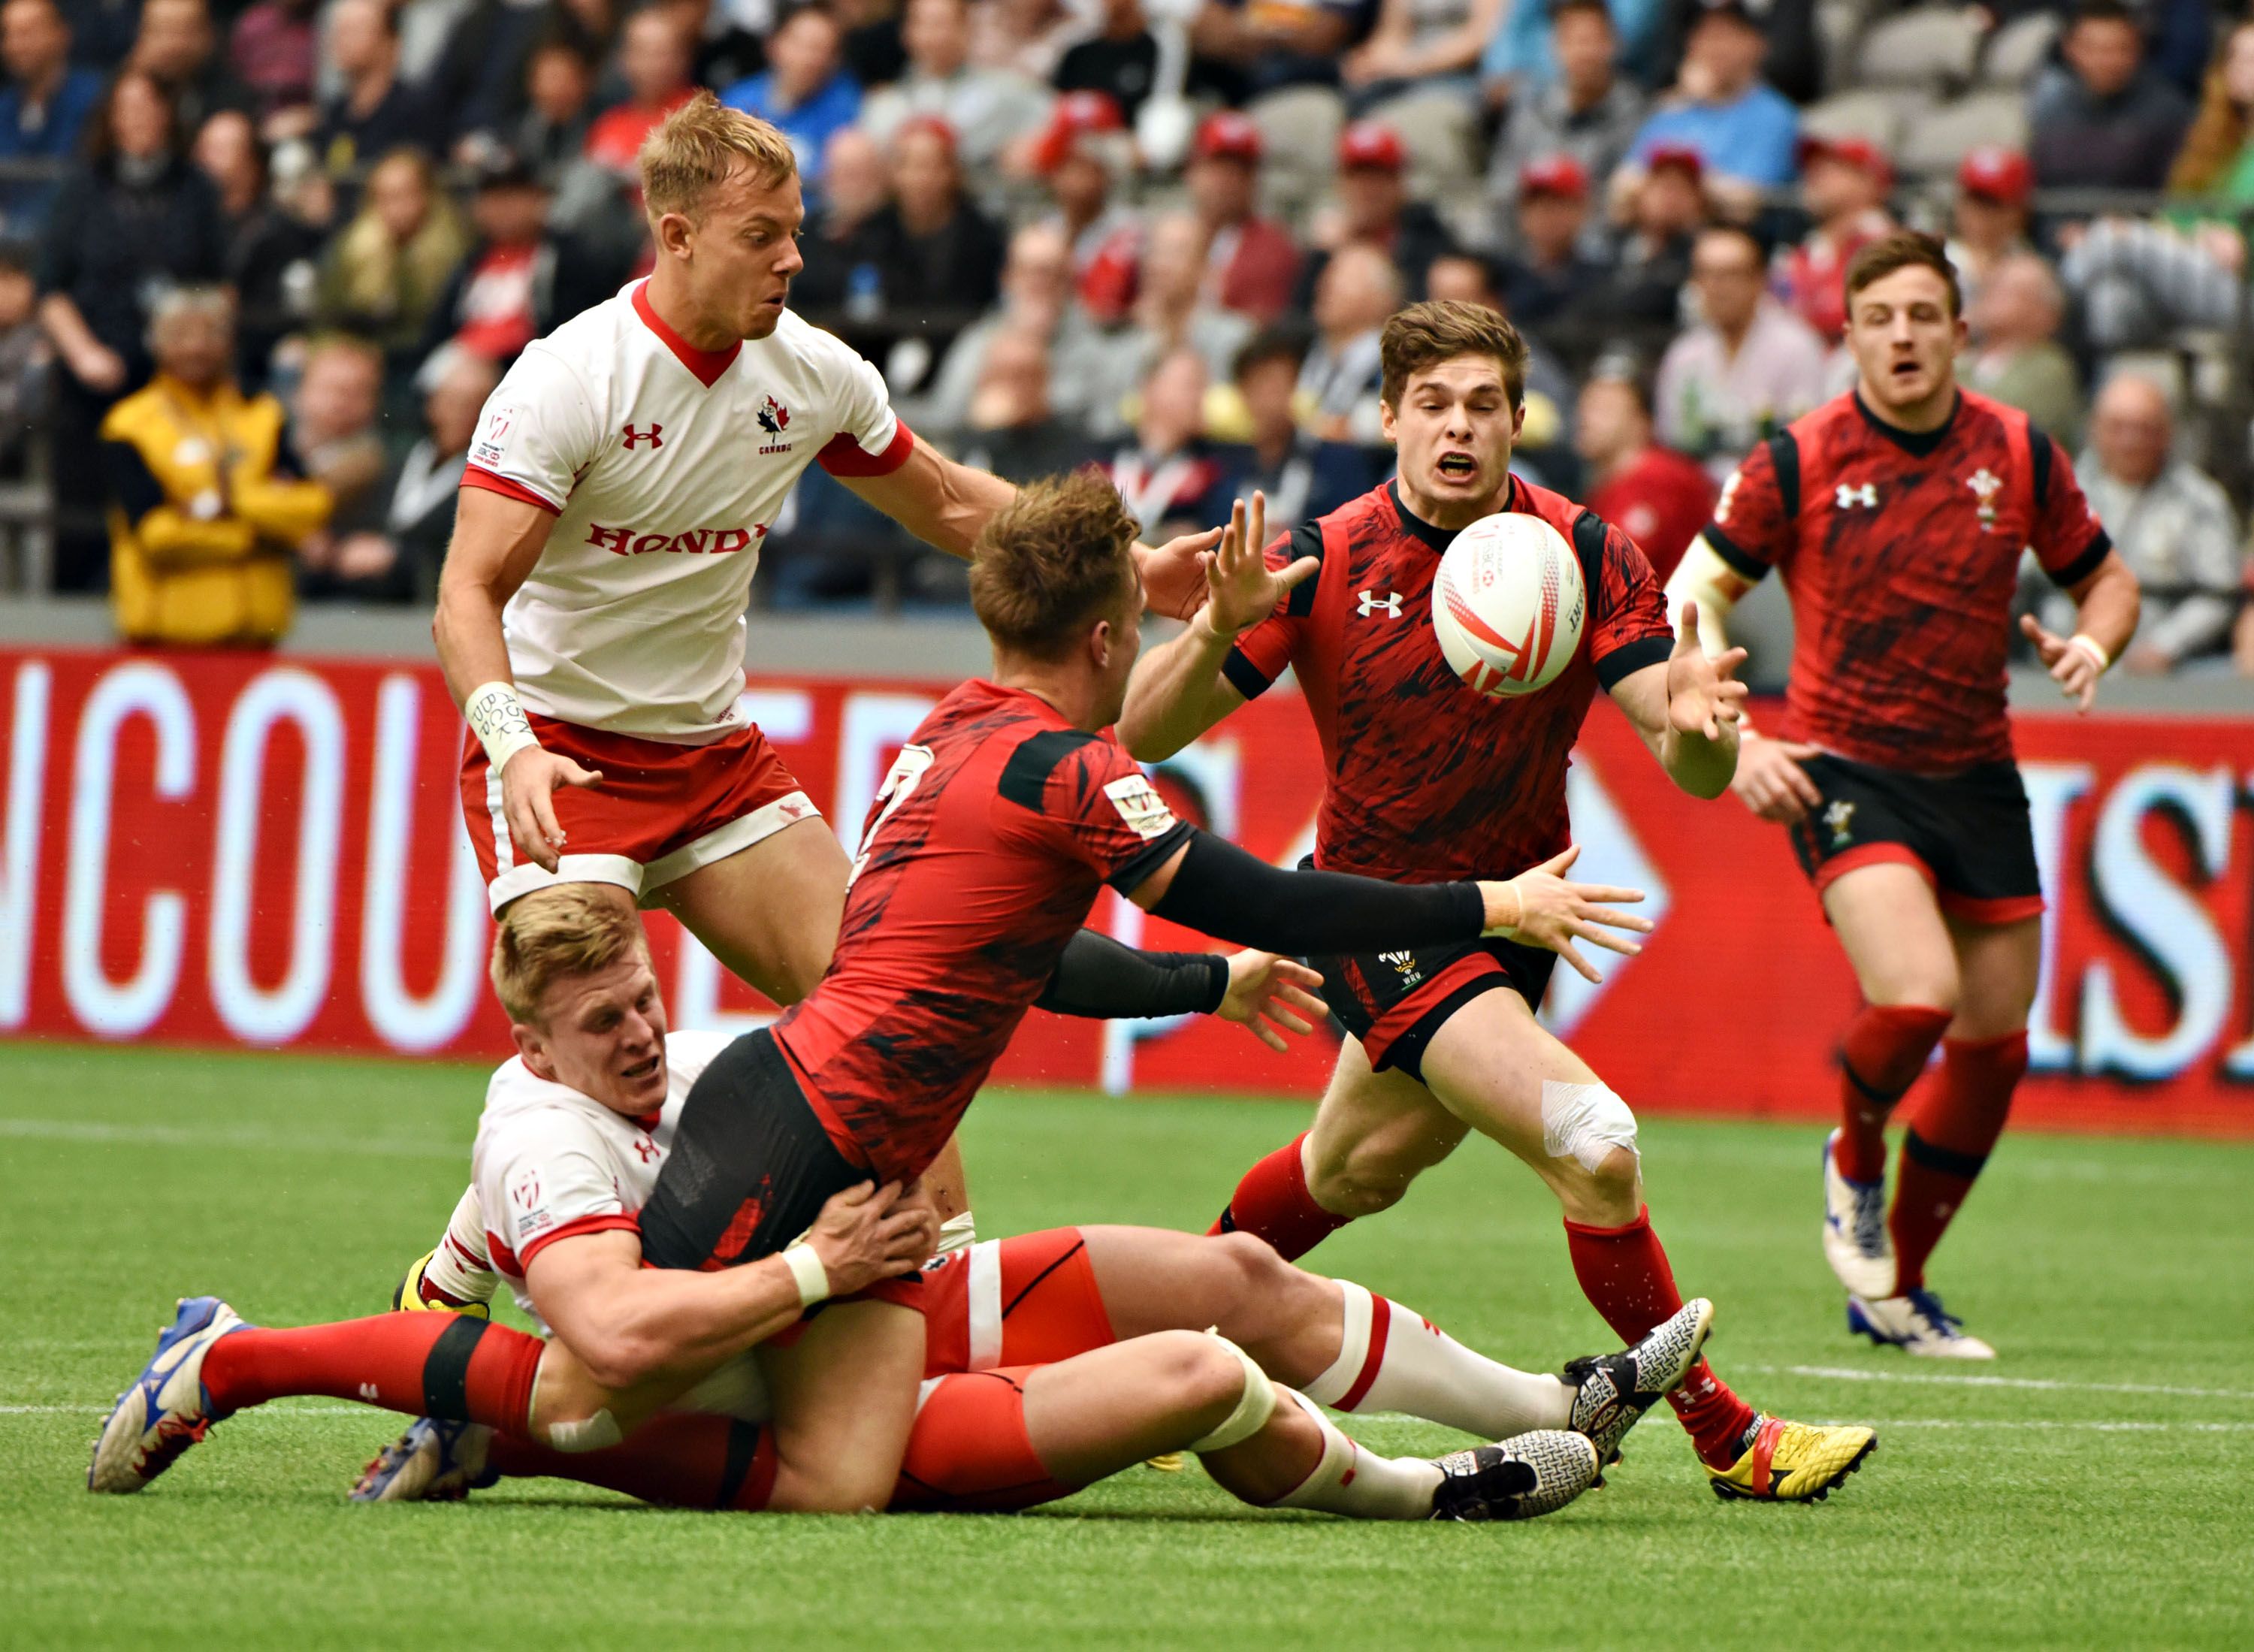 Chris Knight (C) of Wales grabs the ball and runs for a try in a 26-19 win over Canada (in white)  during HSBC World Rugby Sevens Series action in Vancouver, BC, Canada, March 12, 2016.  / AFP / Don MacKinnon        (Photo credit should read DON MACKINNON/AFP/Getty Images)